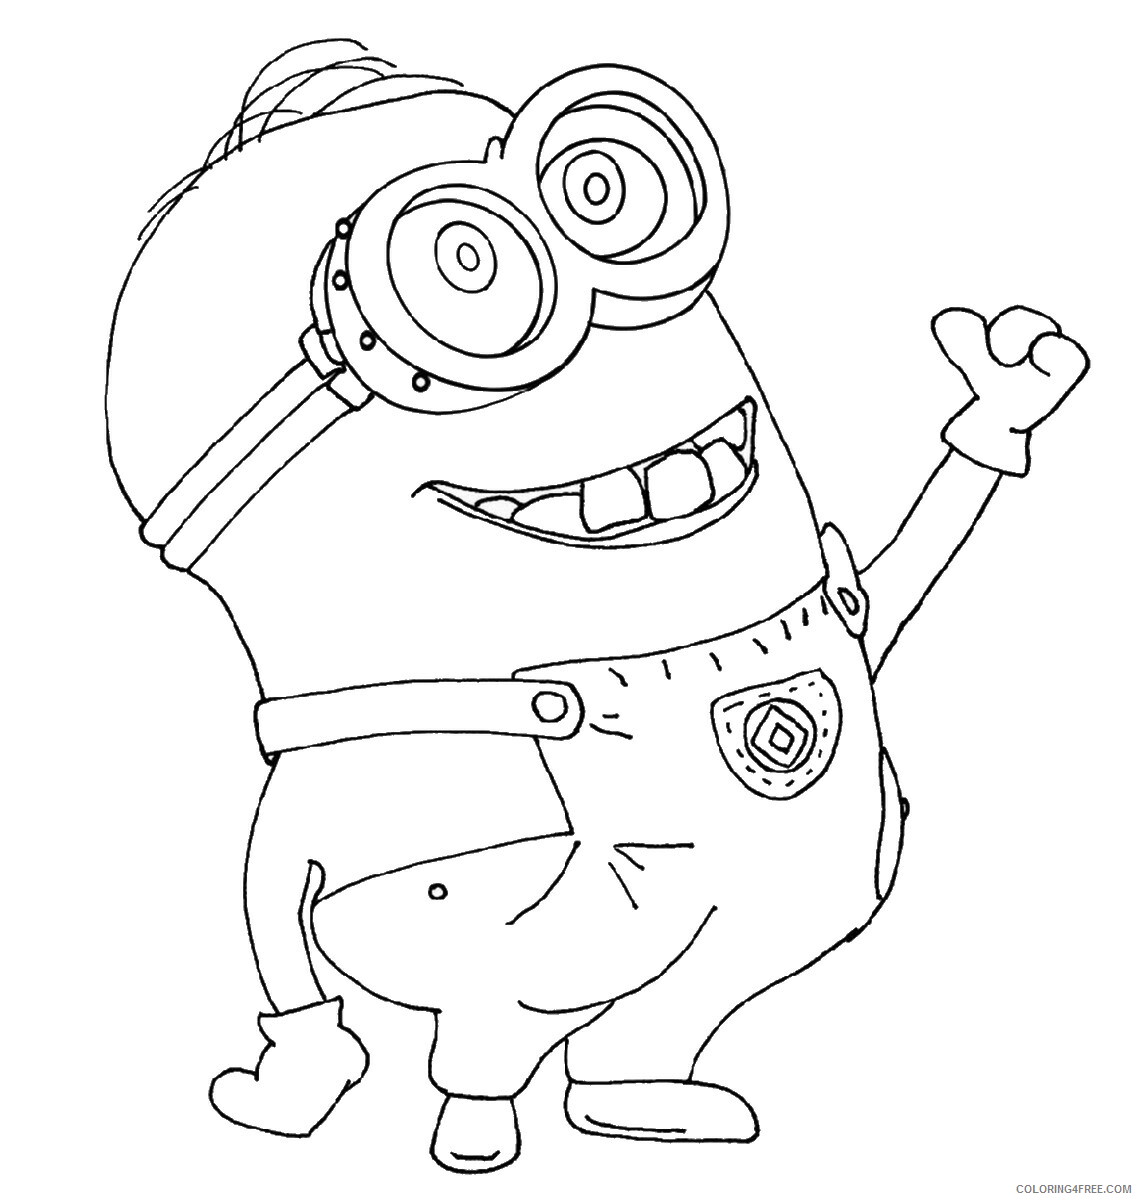 Despicable Me Coloring Pages TV Film despicable_me_cl_13 Printable 2020 02478 Coloring4free